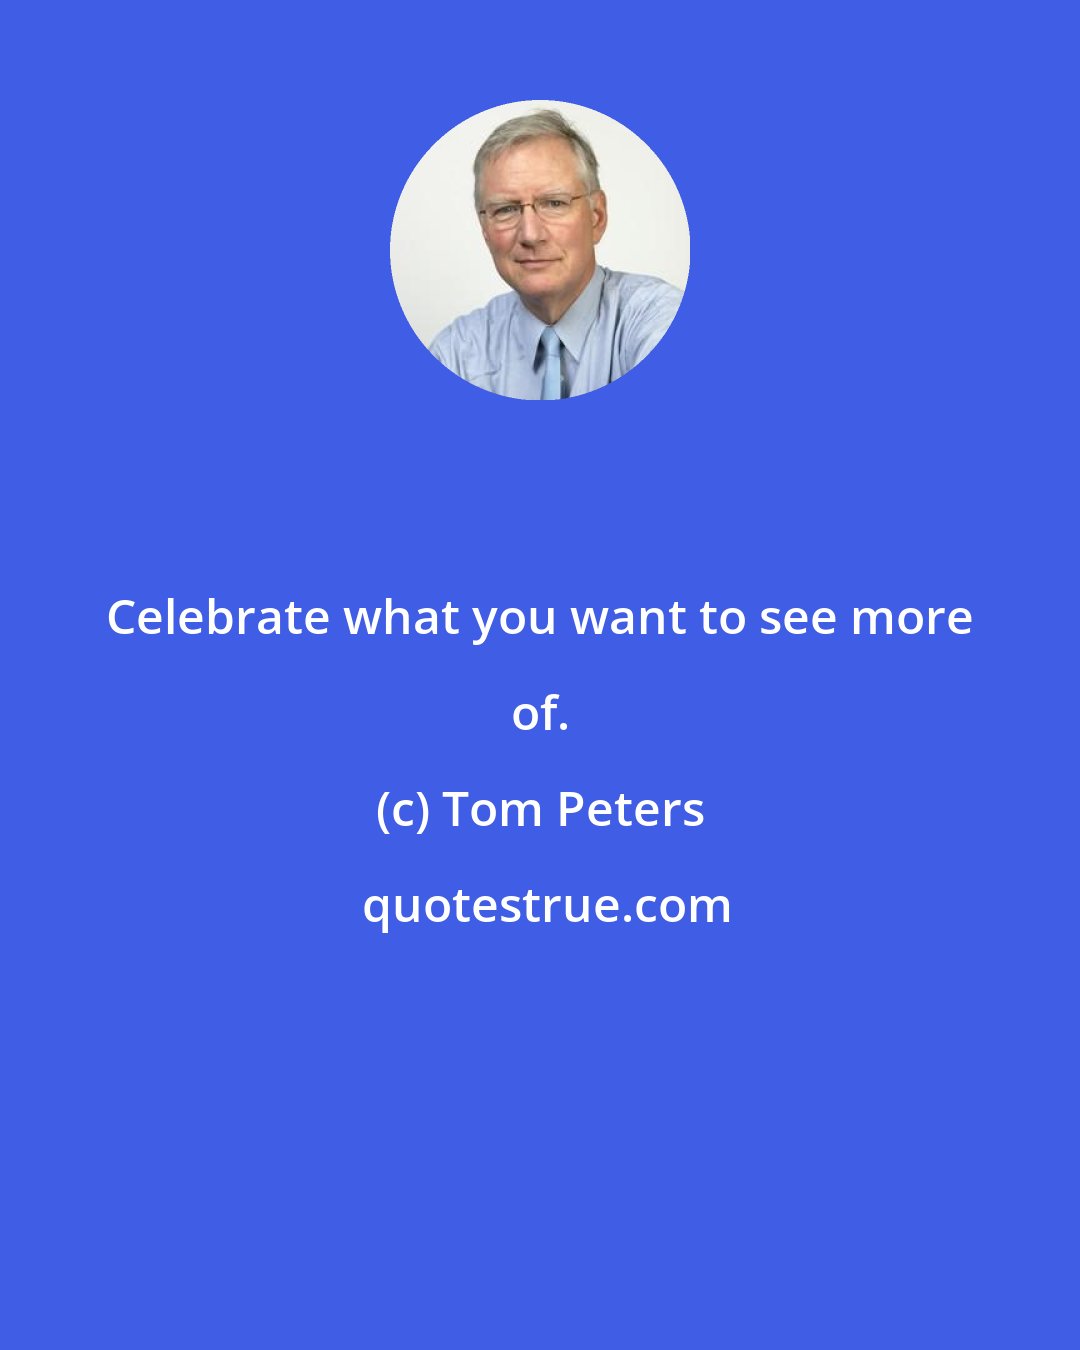 Tom Peters: Celebrate what you want to see more of.